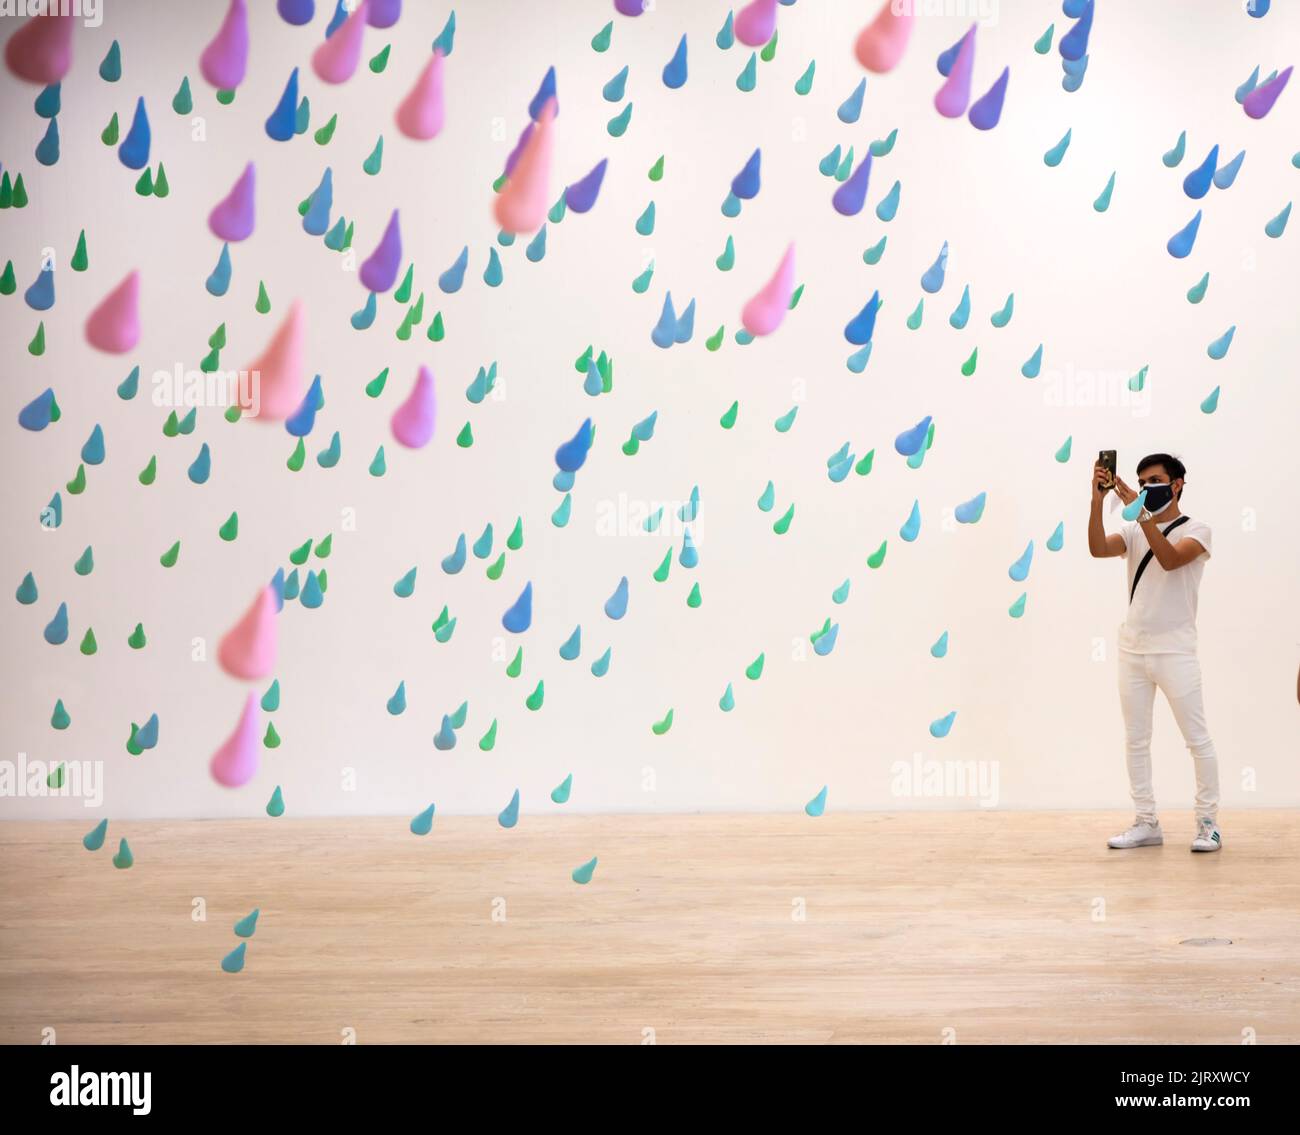 Man wearing face mask takes smartphone photo of colourfull rainrops art installation by Swiss artist Urs Fischer in the Jumex Museum, Mexico City, Mex Stock Photo